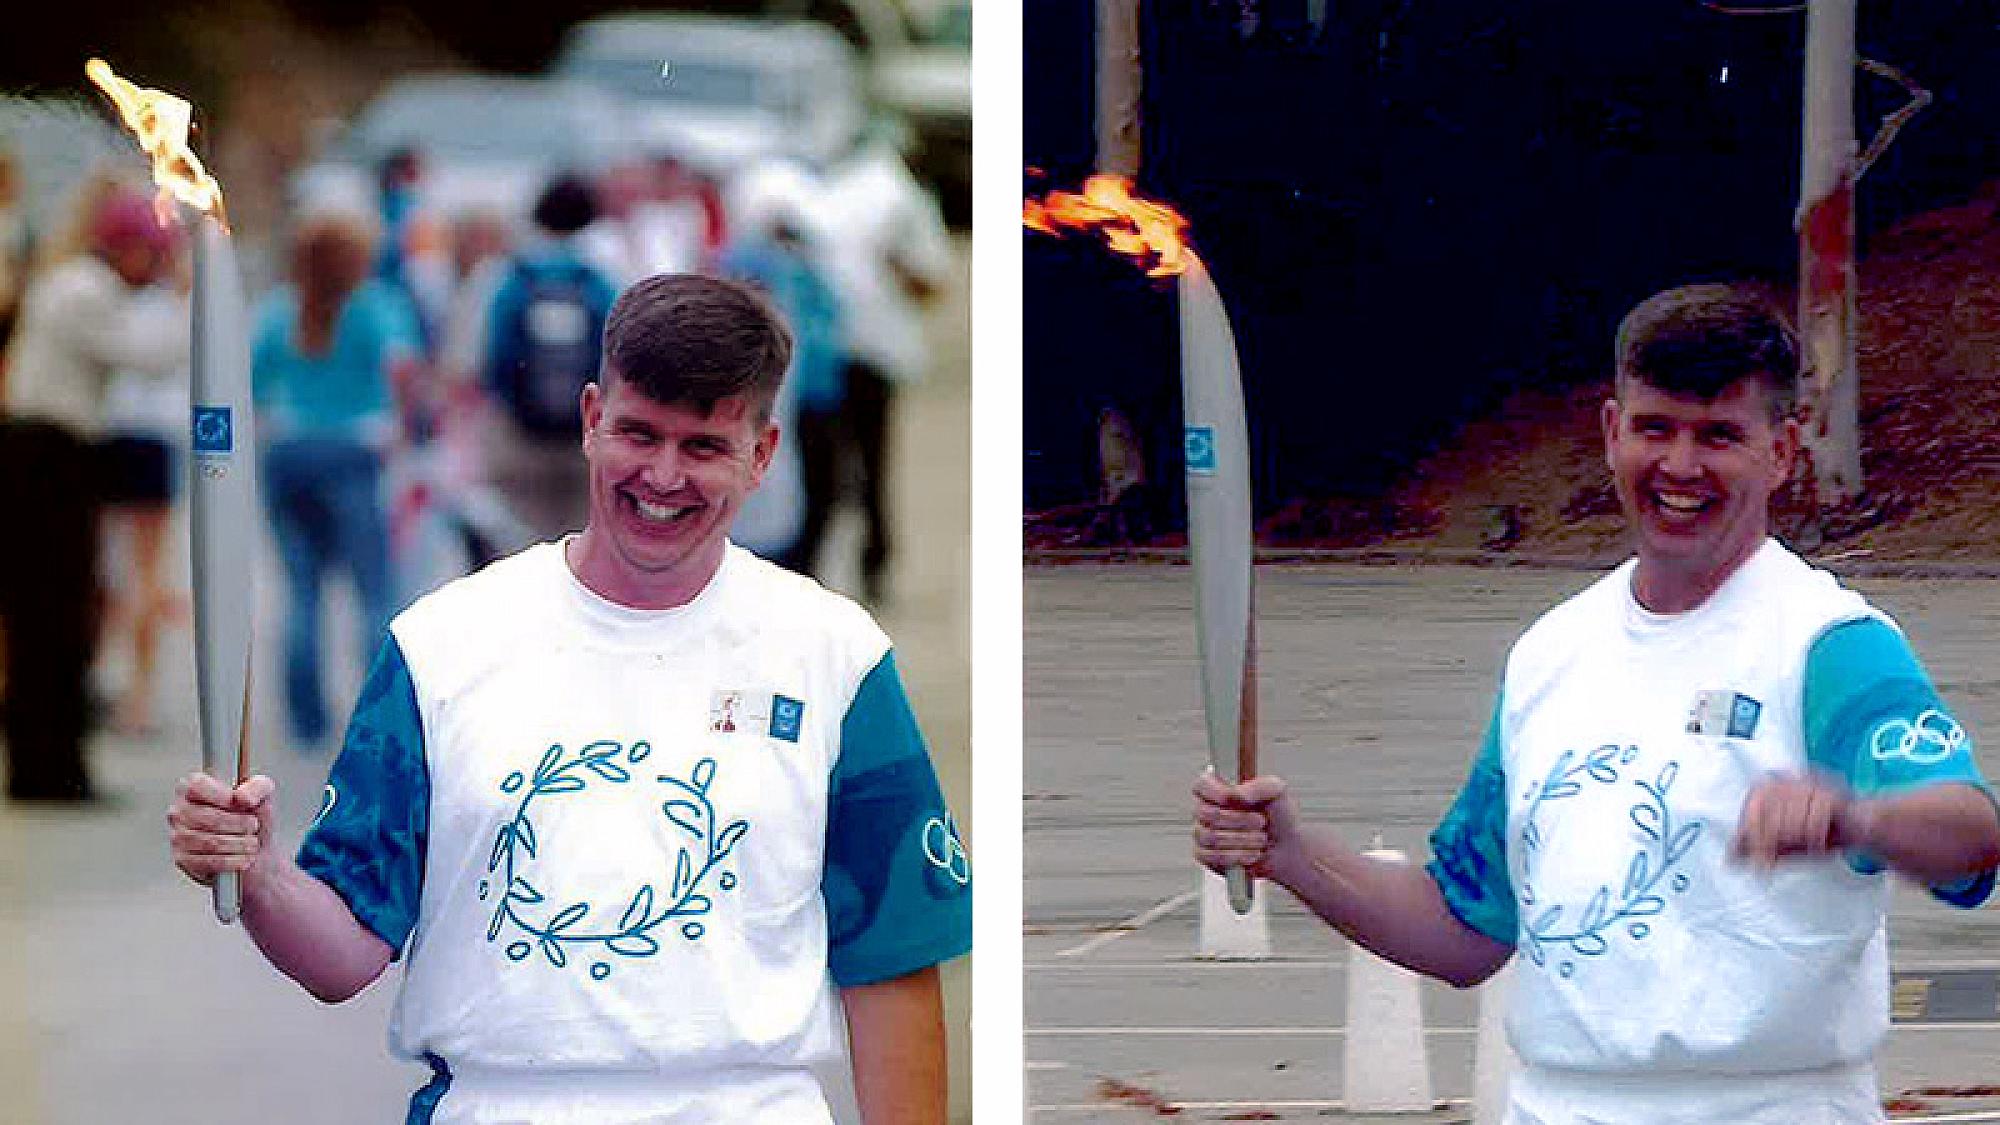 Tim as a torchbearer in Los Angeles, California for the 2004 Summer Olympics